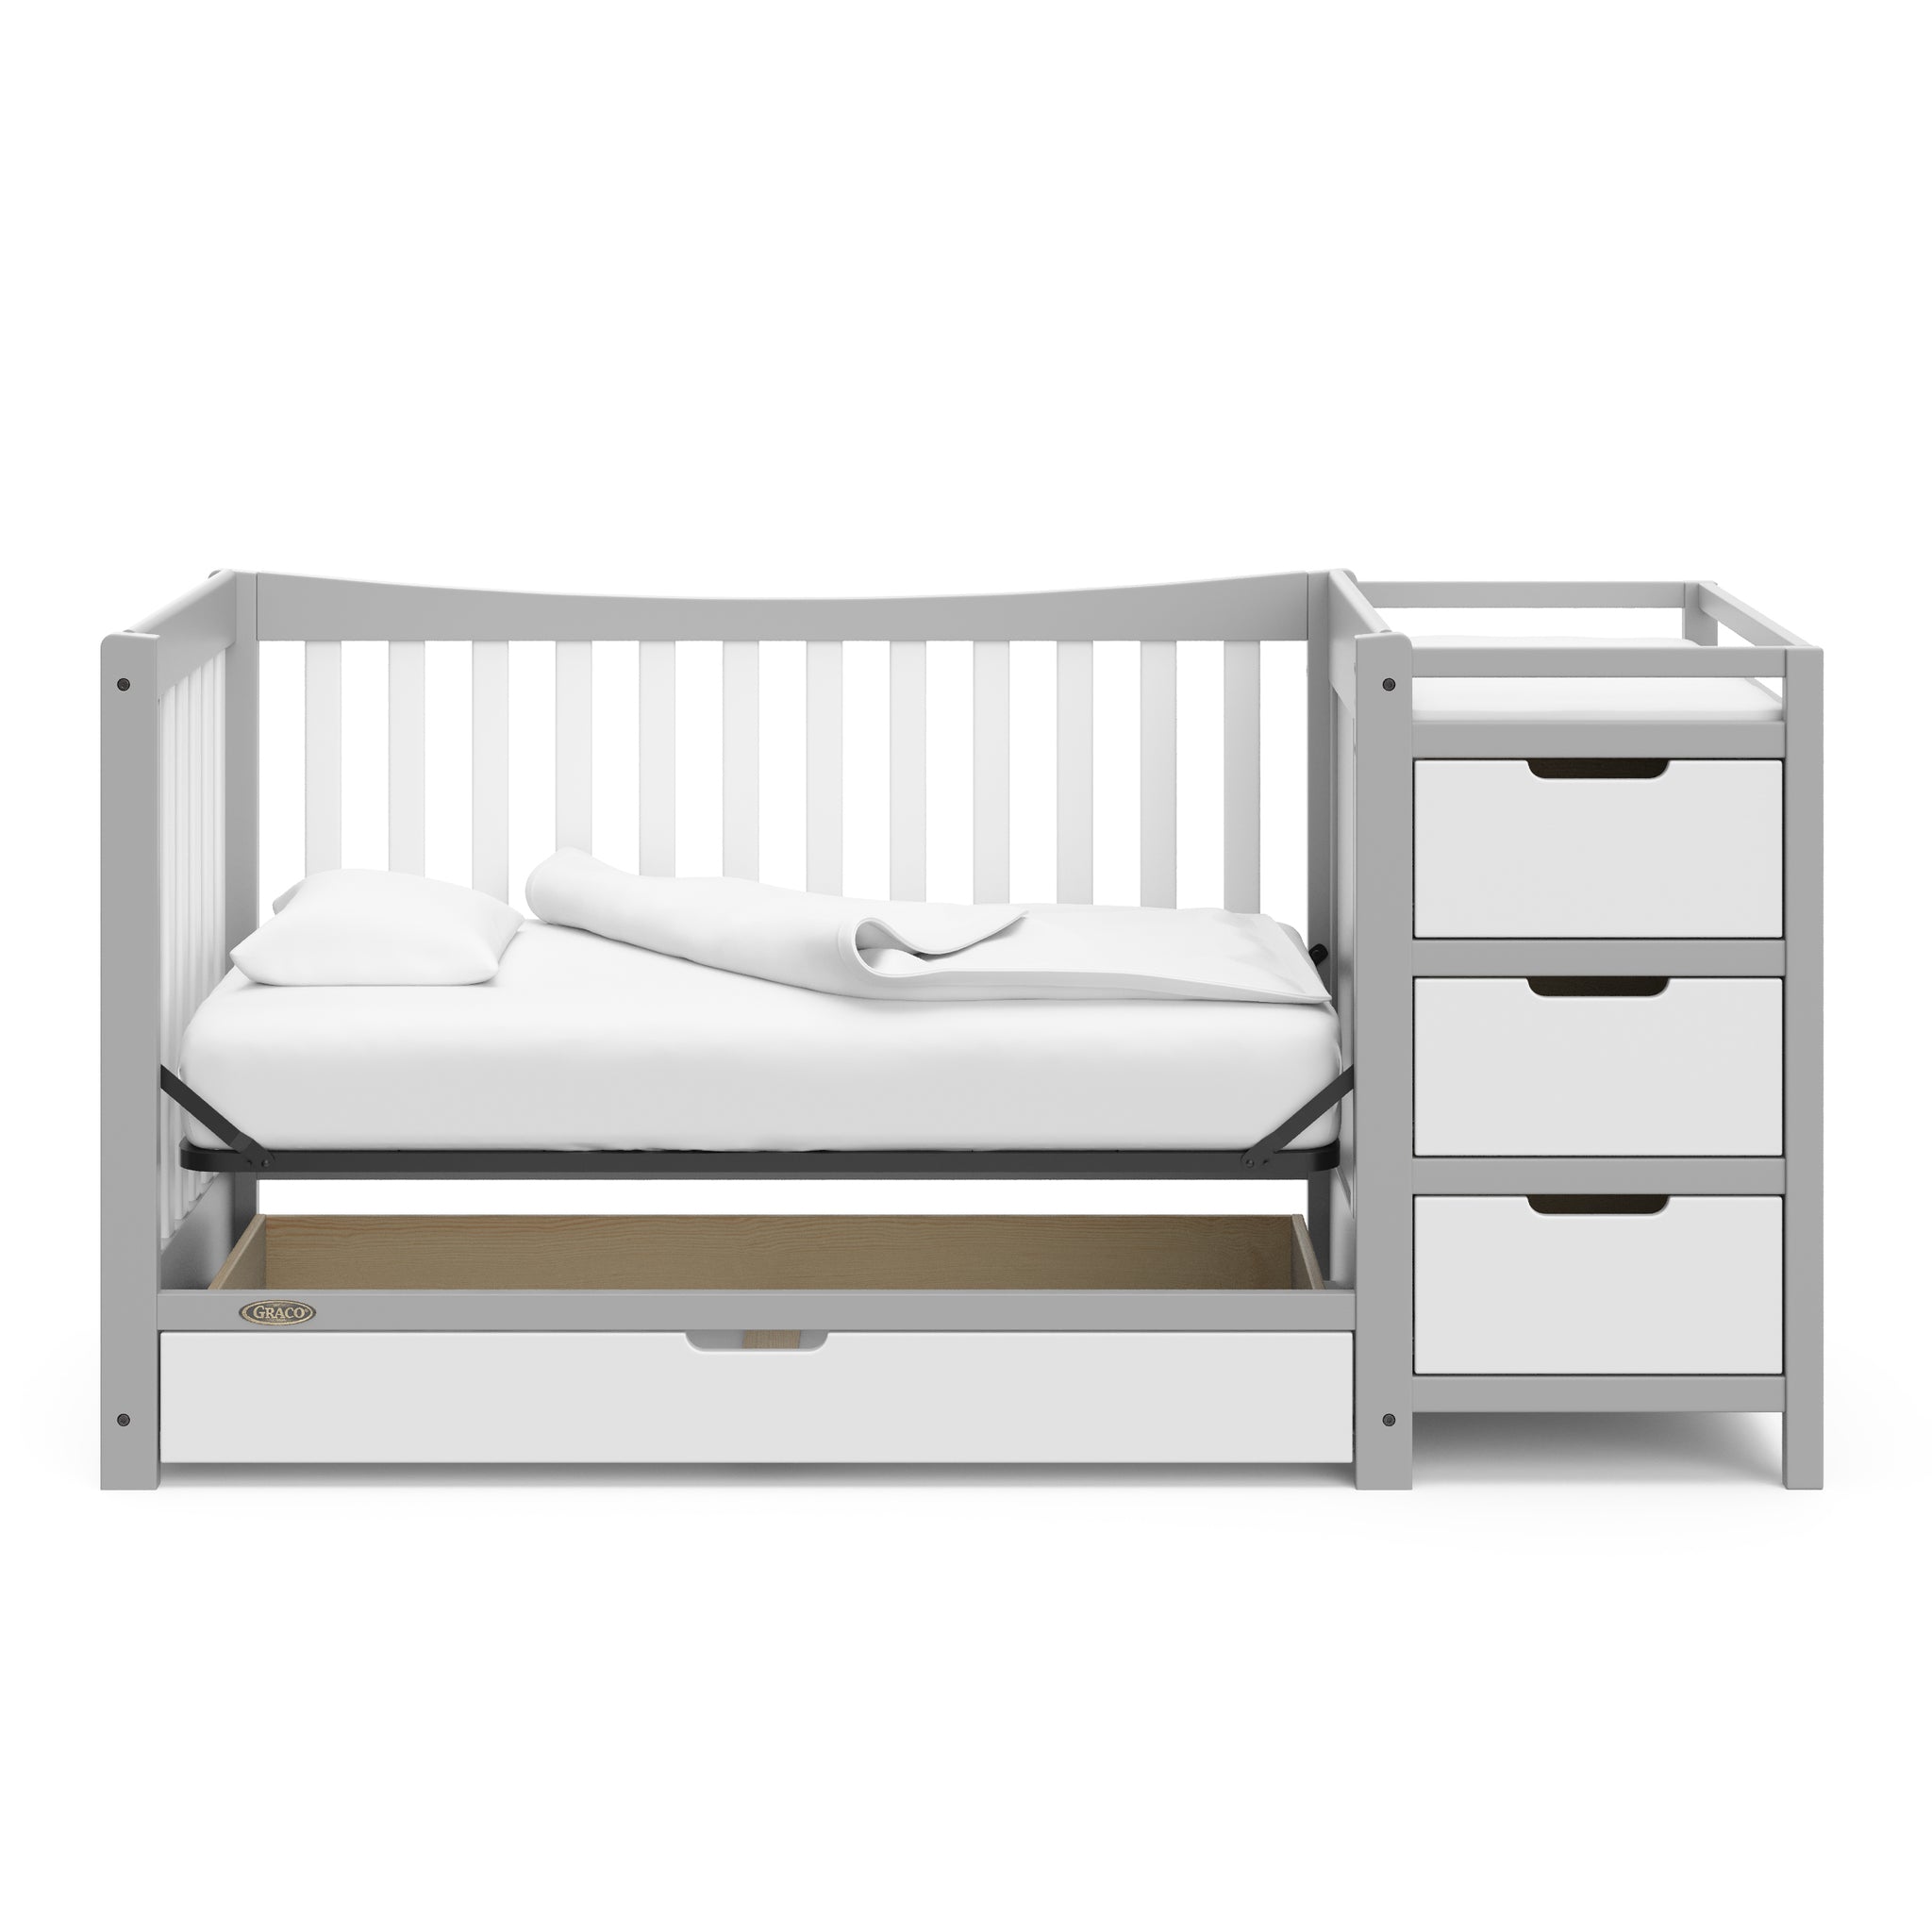 Pebble gray and white crib and changer with drawer in daybed conversion 